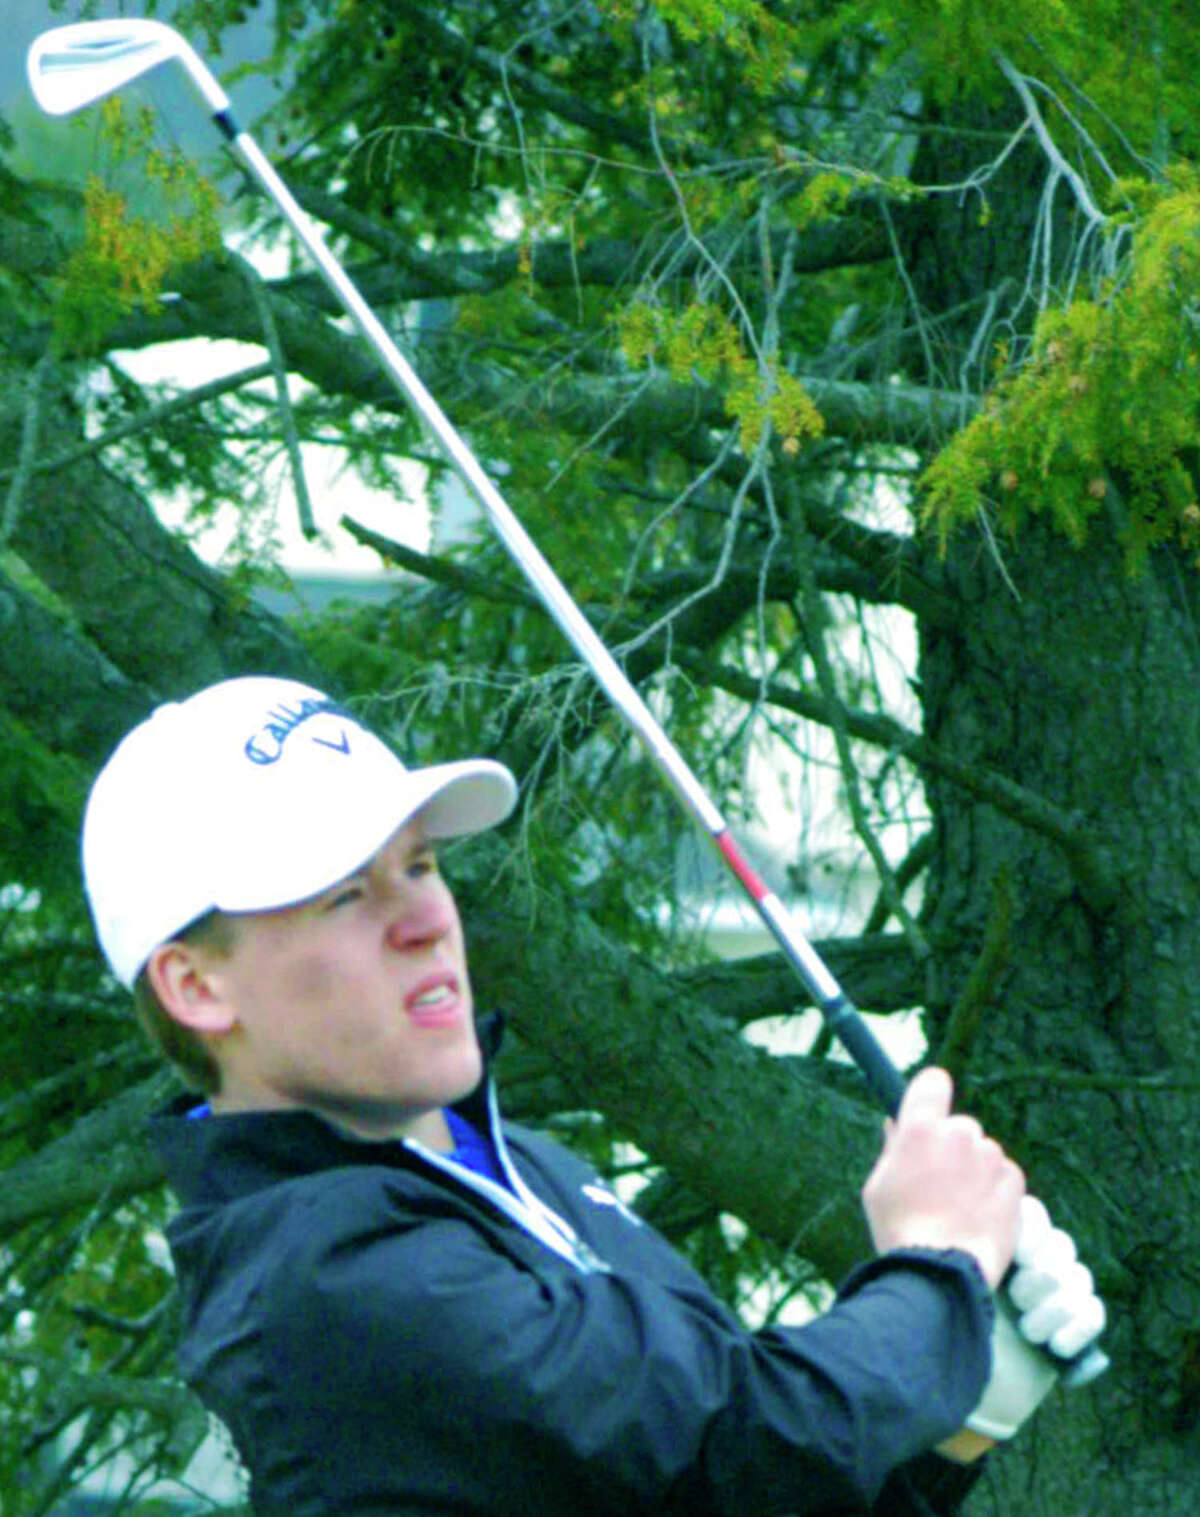 Cole Case's veteran talents should anchor a promising 50th season of New Milford High School golf. April 2014